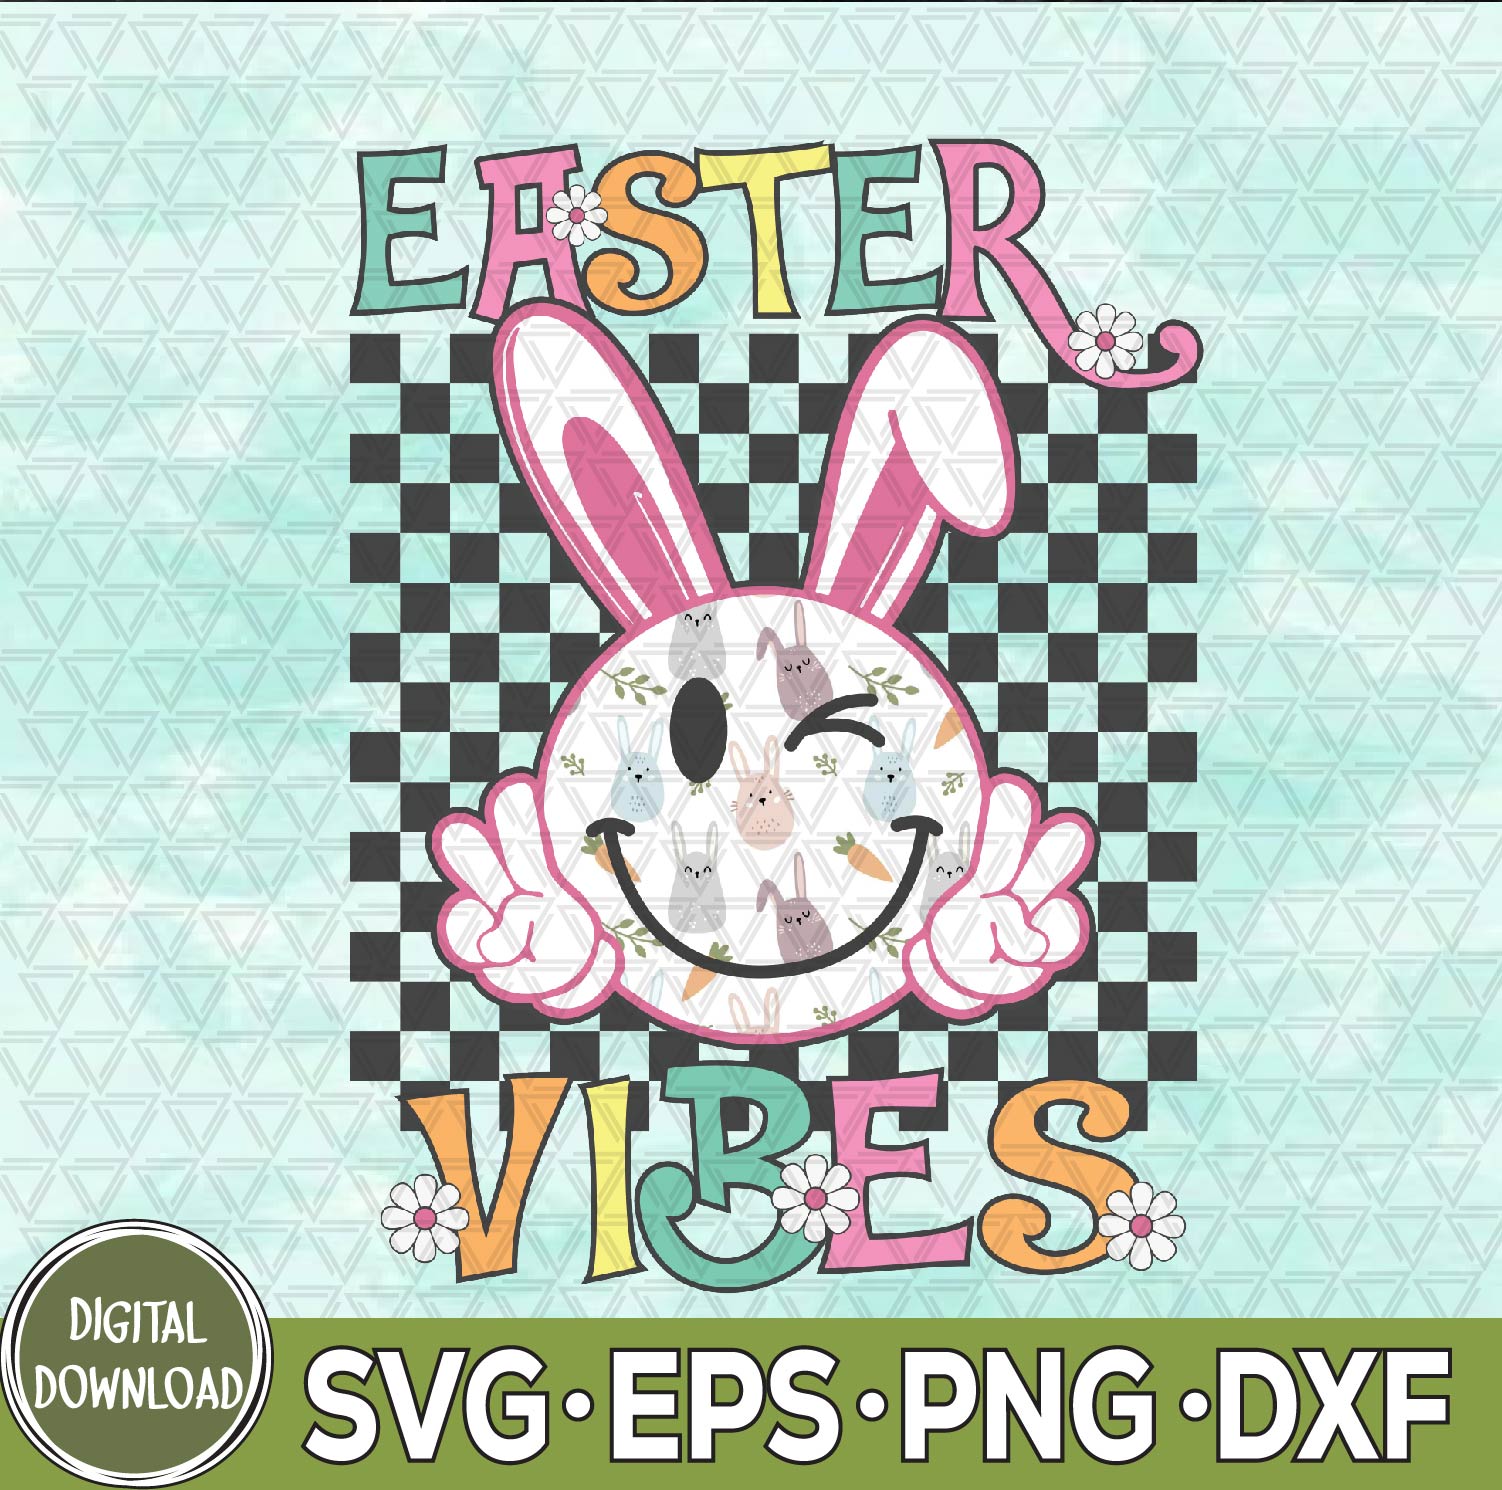 WTMNEW9file 09 66 Retro Groovy Easter Vibes Bunny Checkered Smile Svg, Eps, Png, Dxf